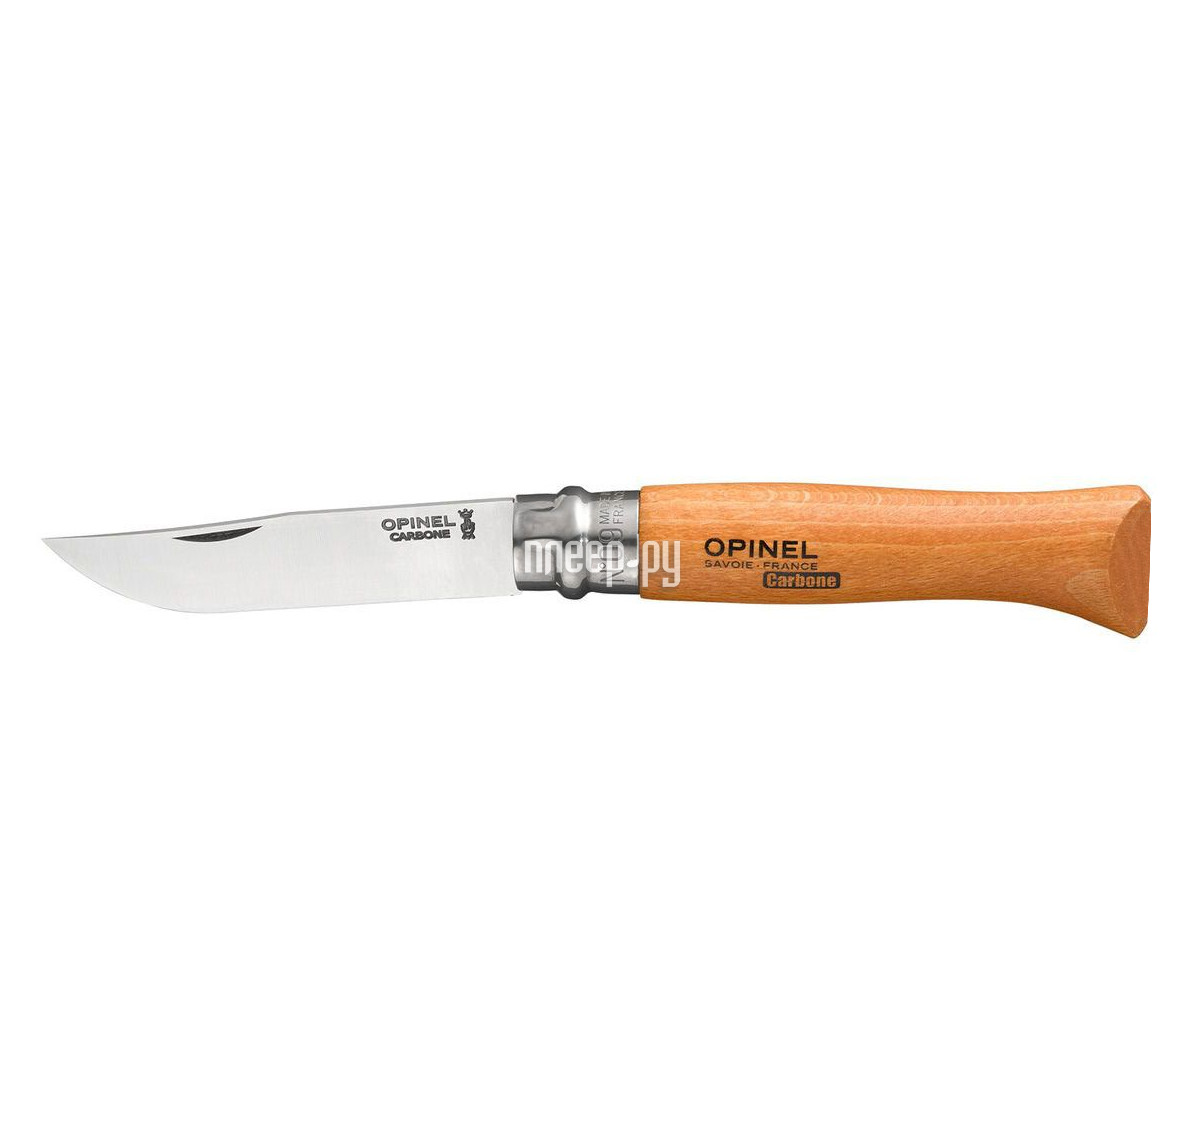  Opinel Tradition 09 -   90 113090 